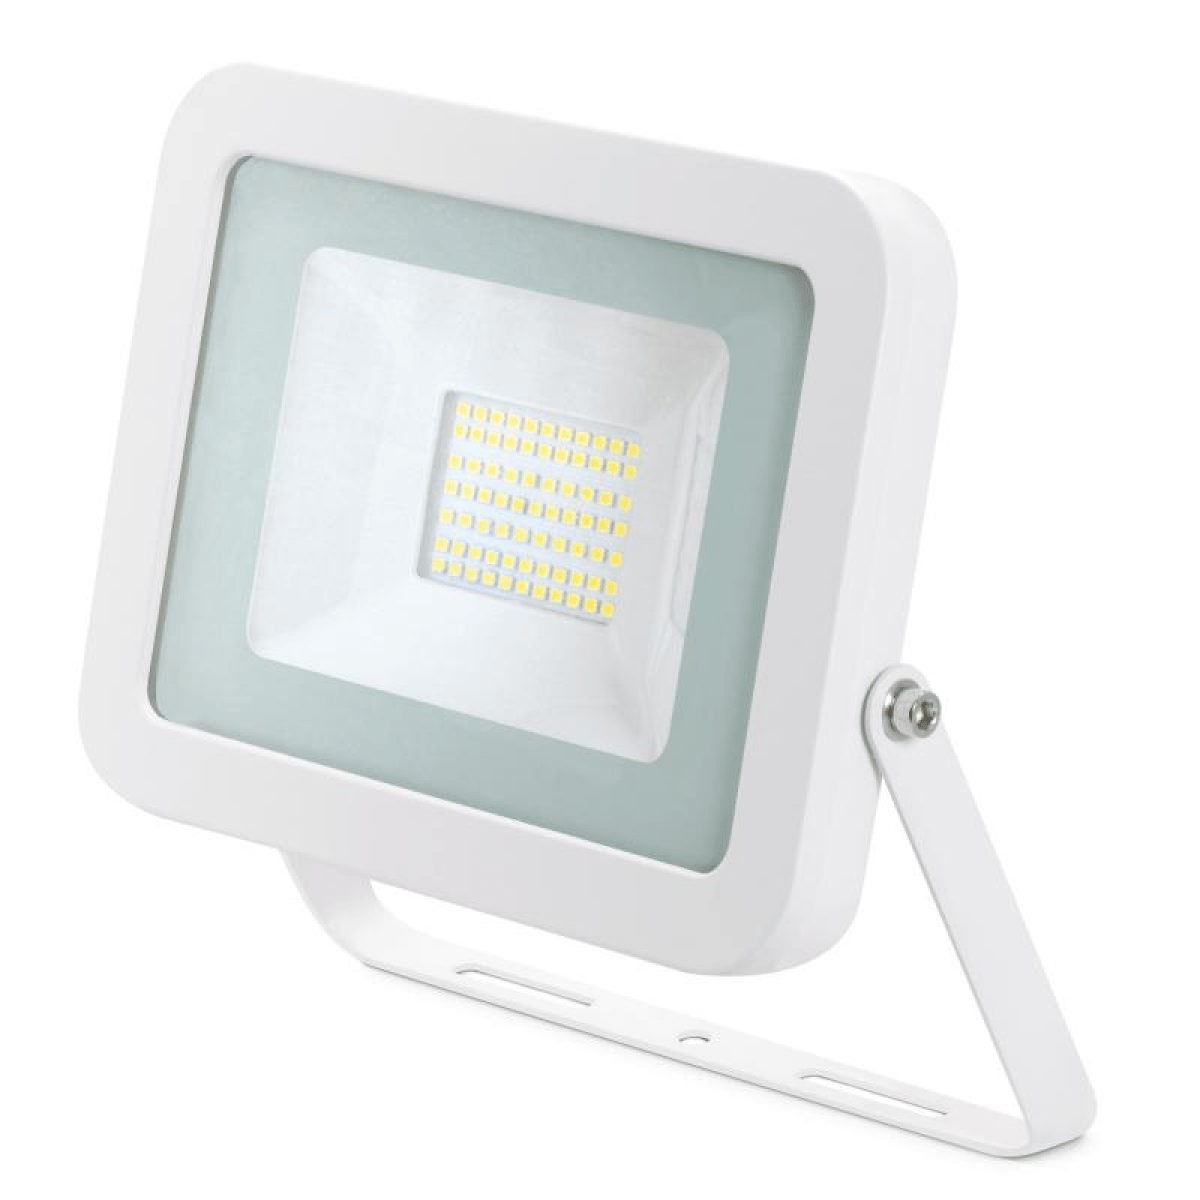 Image of a JCC floodlight on a white background